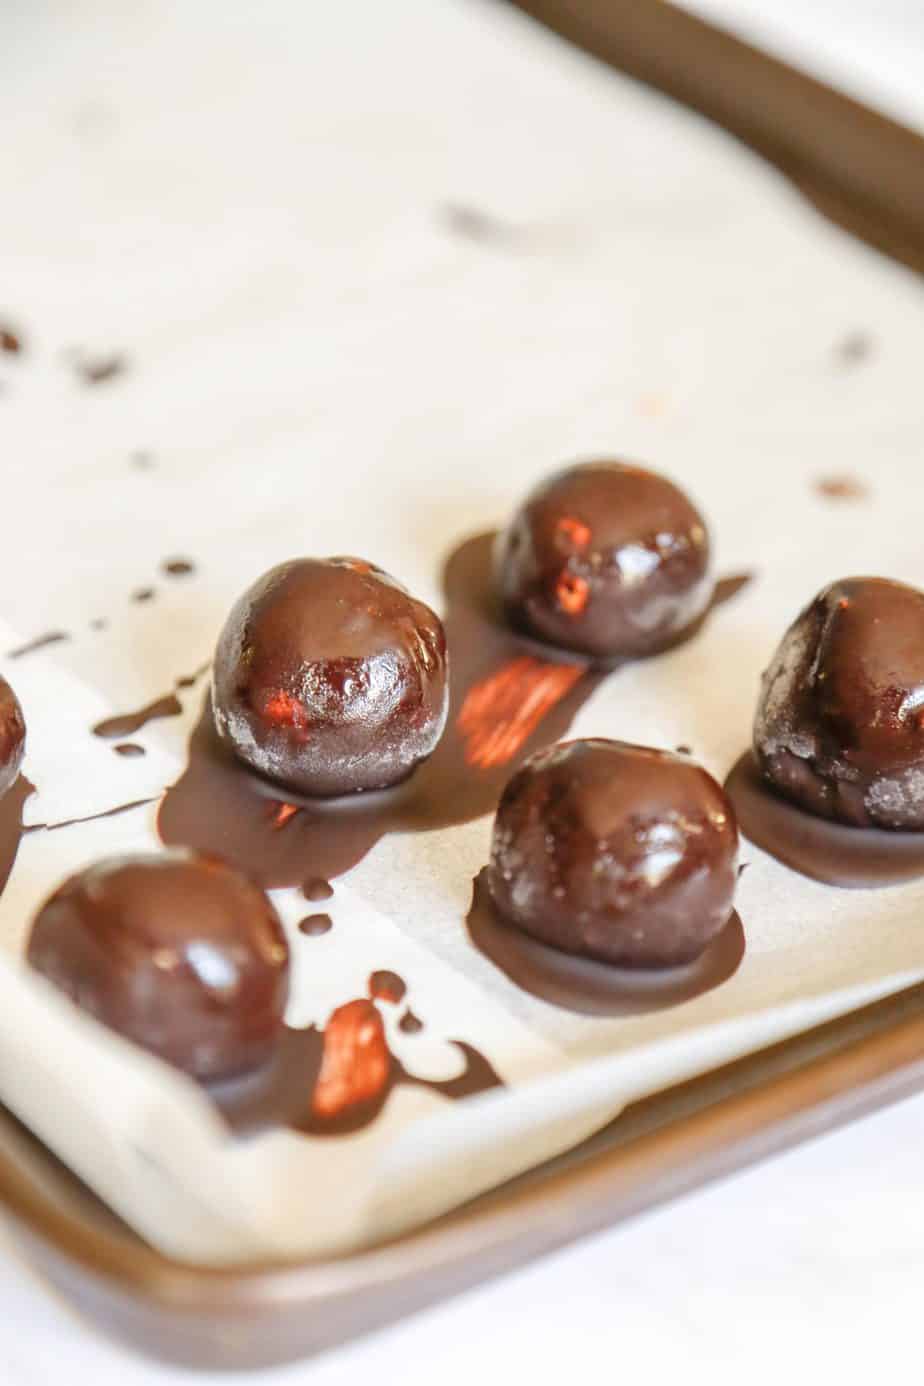 Chocolate truffles with cashew filling.